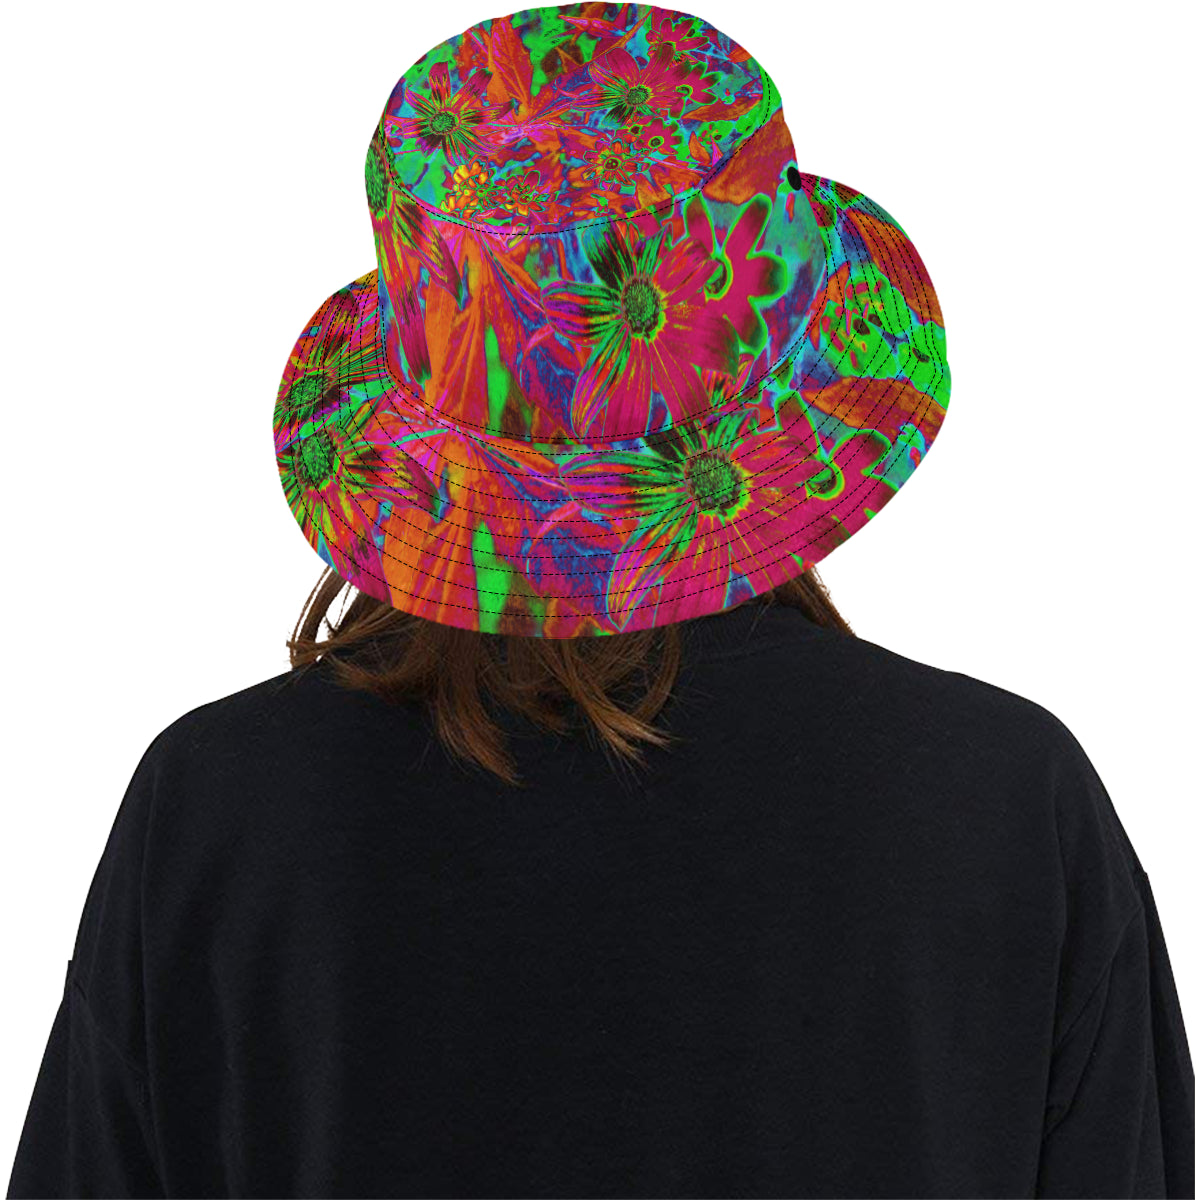 Bucket Hats, Psychedelic Groovy Red and Green Wildflowers